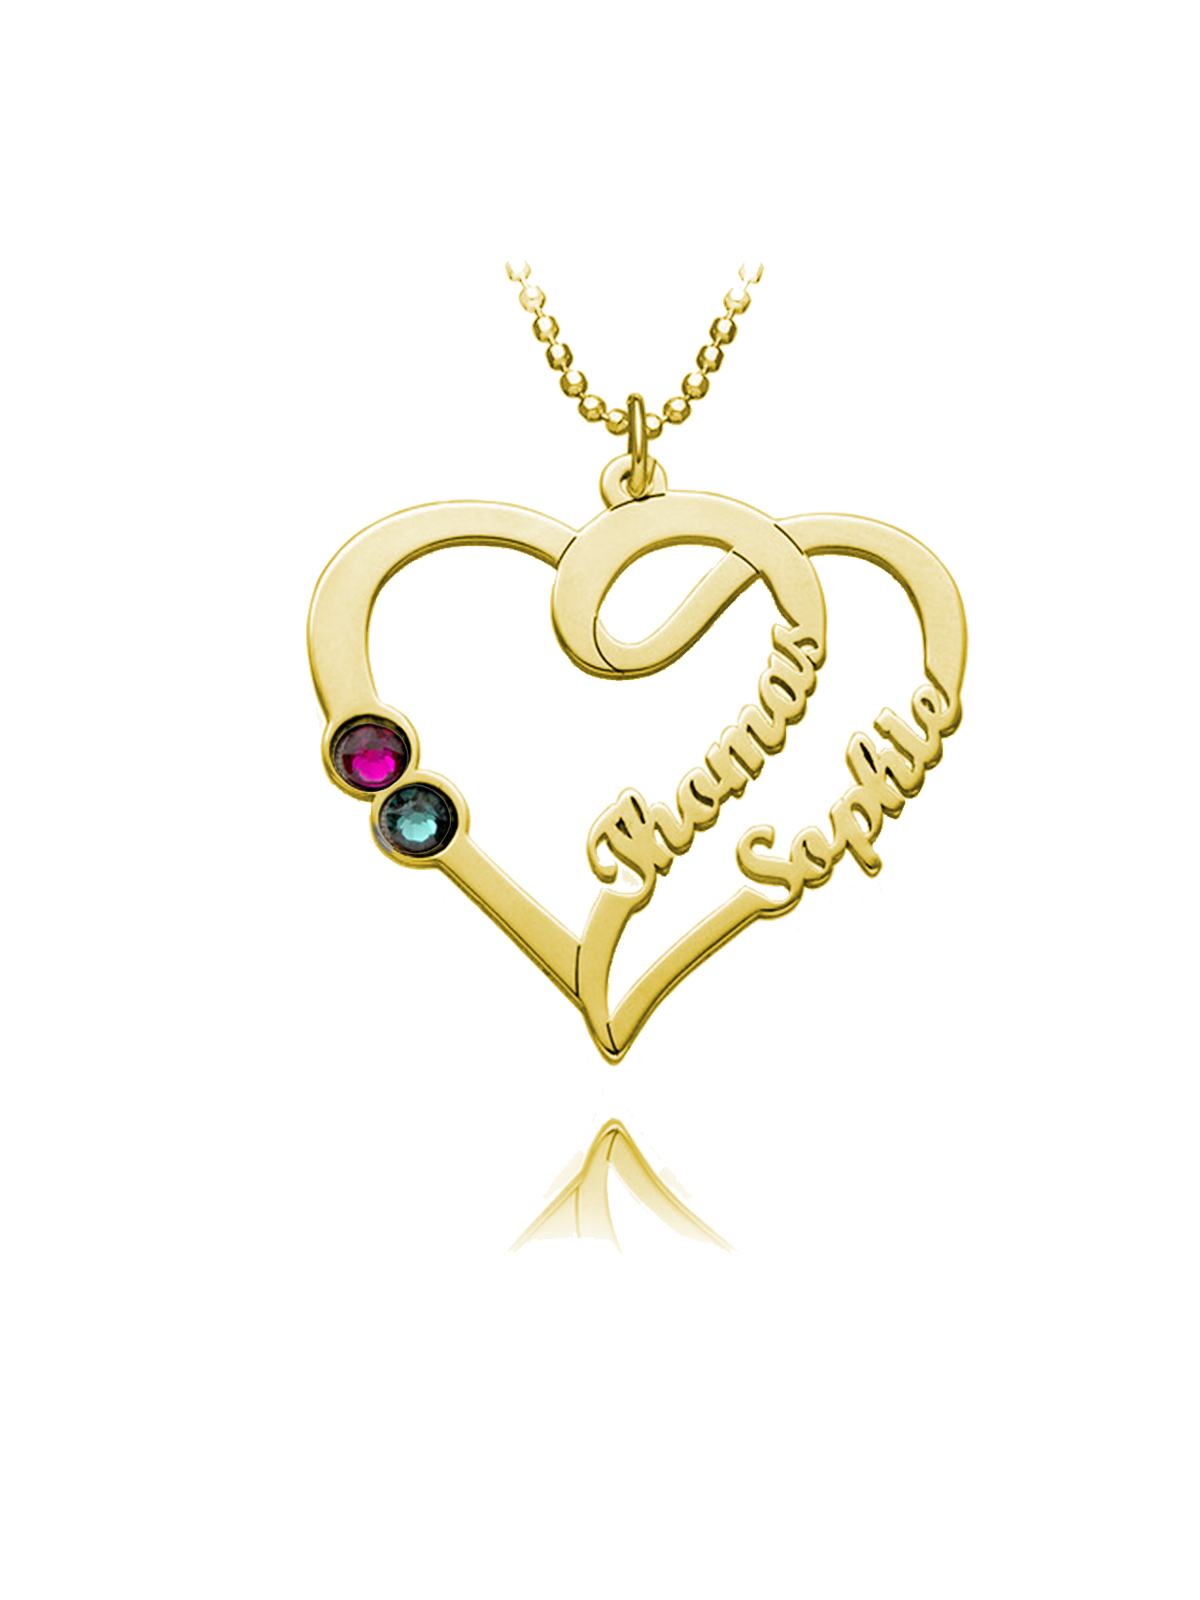 overlapping heart name necklace 18k gold plated silver